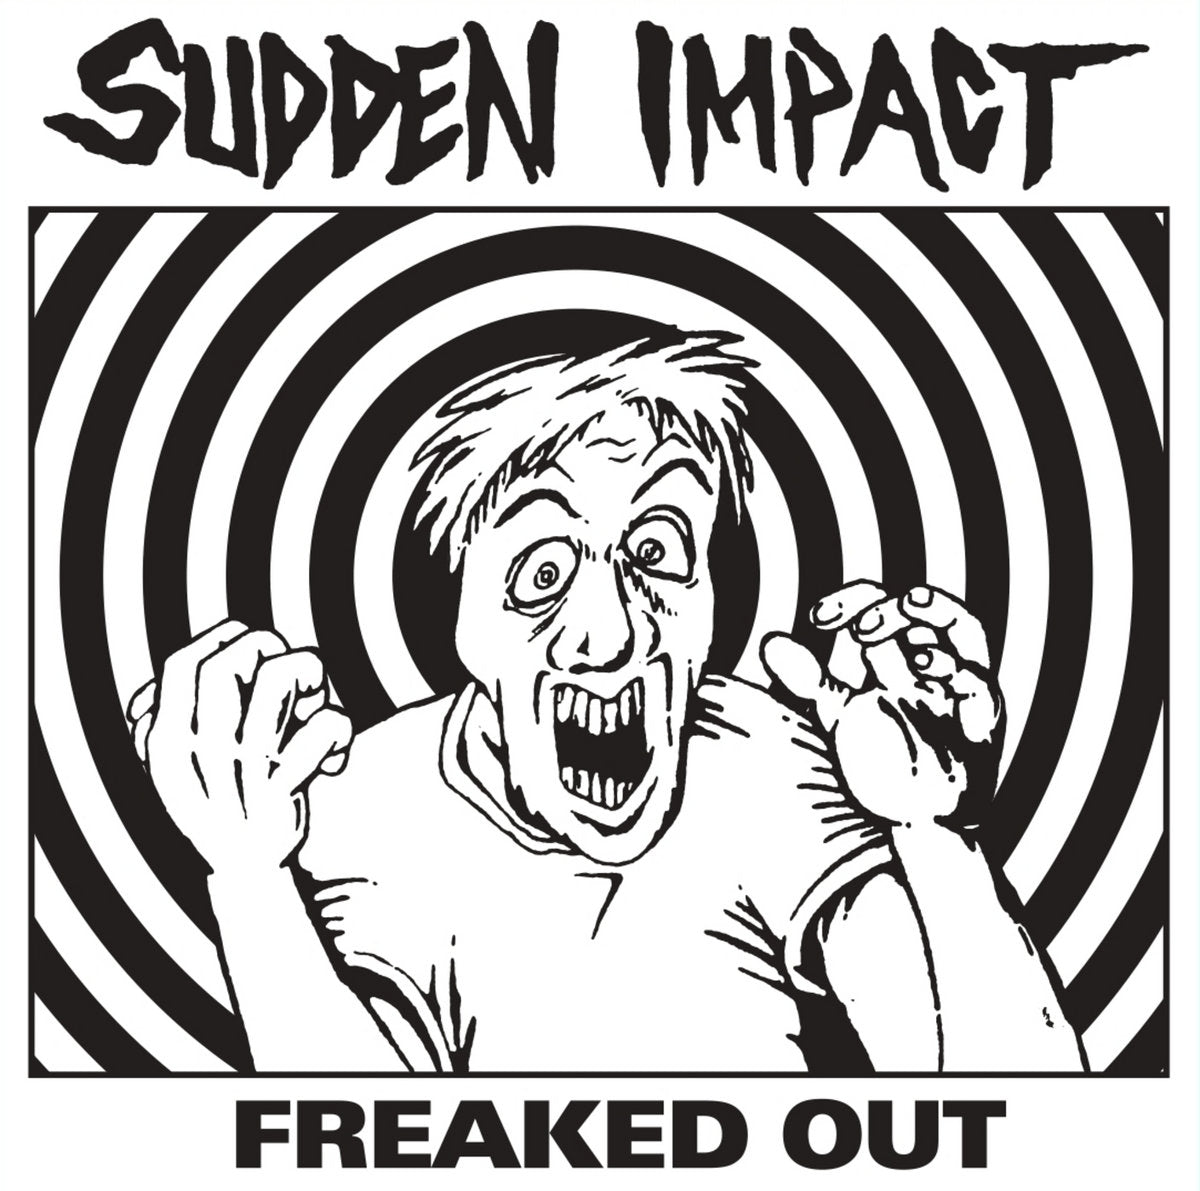 Sudden Impact "Freaked Out" 7" (Import)